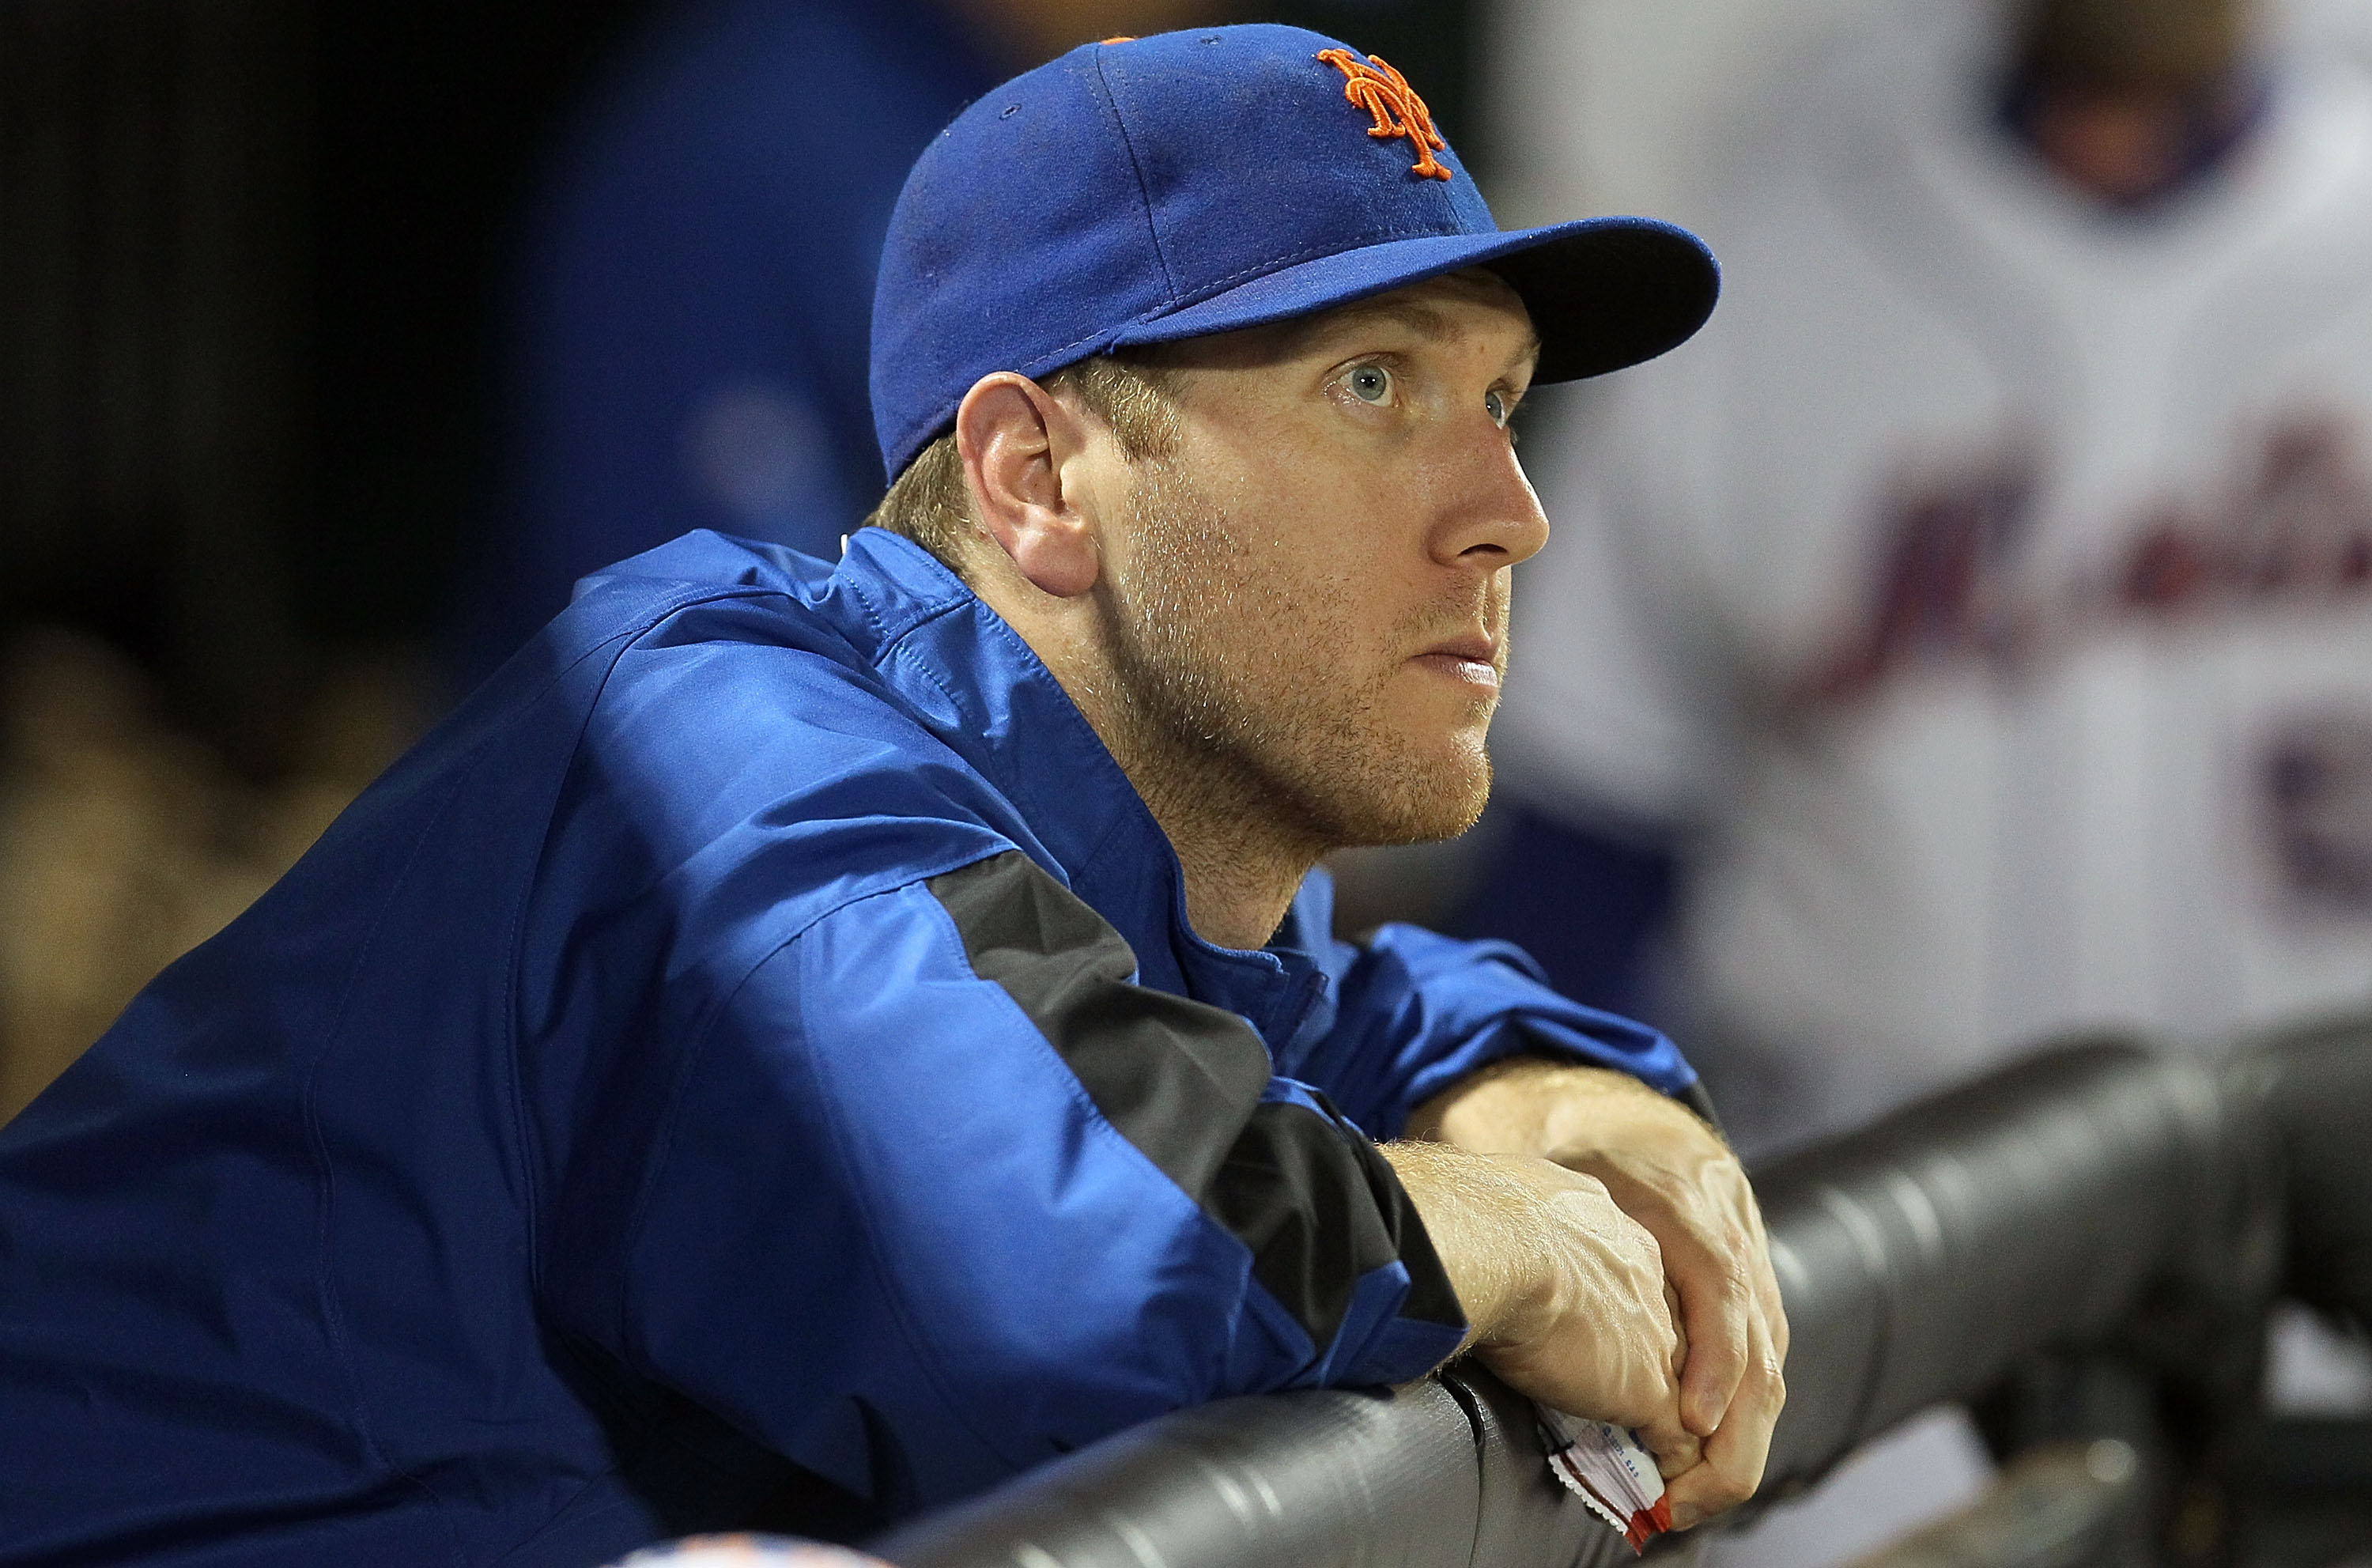 NEW YORK - AUGUST 28:  Jason Bay #44 of the New York Mets looks on from the dugout against the Houston Astros on August 28, 2010 at Citi Field in the Flushing neighborhood of the Queens borough of New York City.  (Photo by Jim McIsaac/Getty Images)